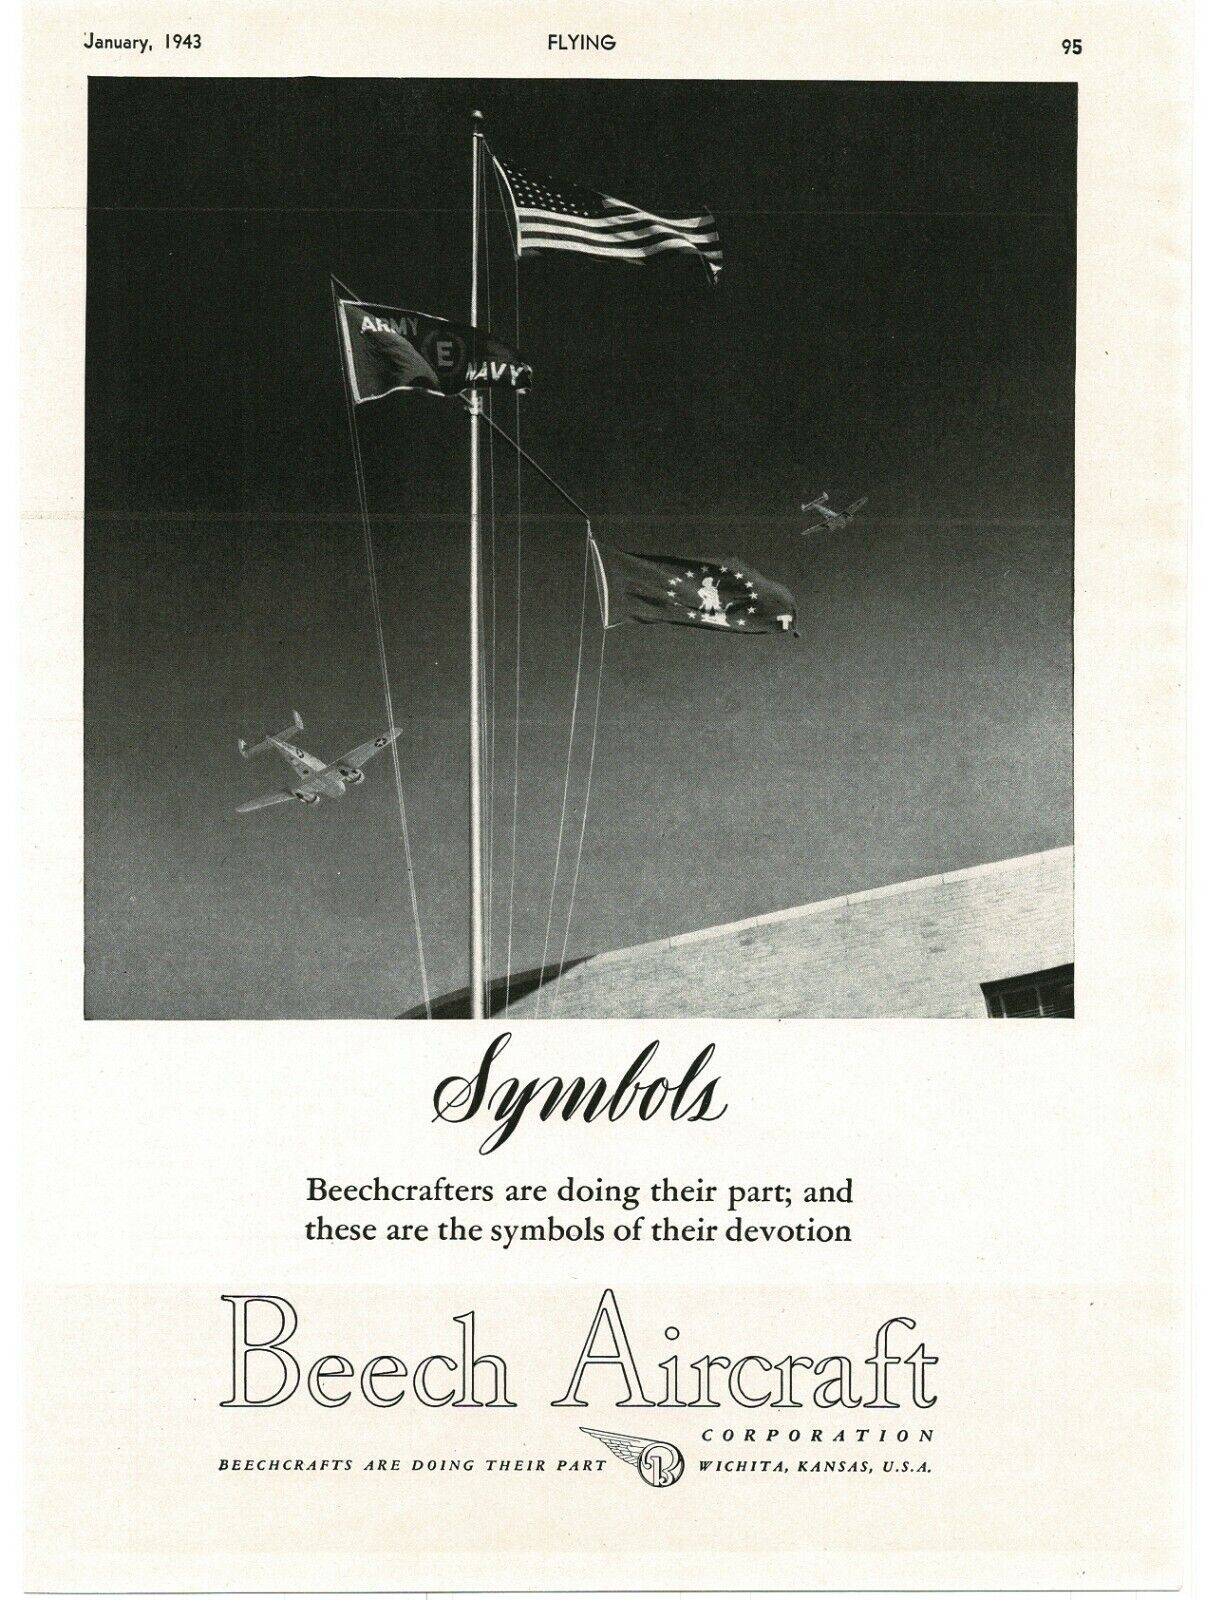 1943  BEECH AIRCRAFT Flags Symbols of devotion by employees WWII Vintage Ad